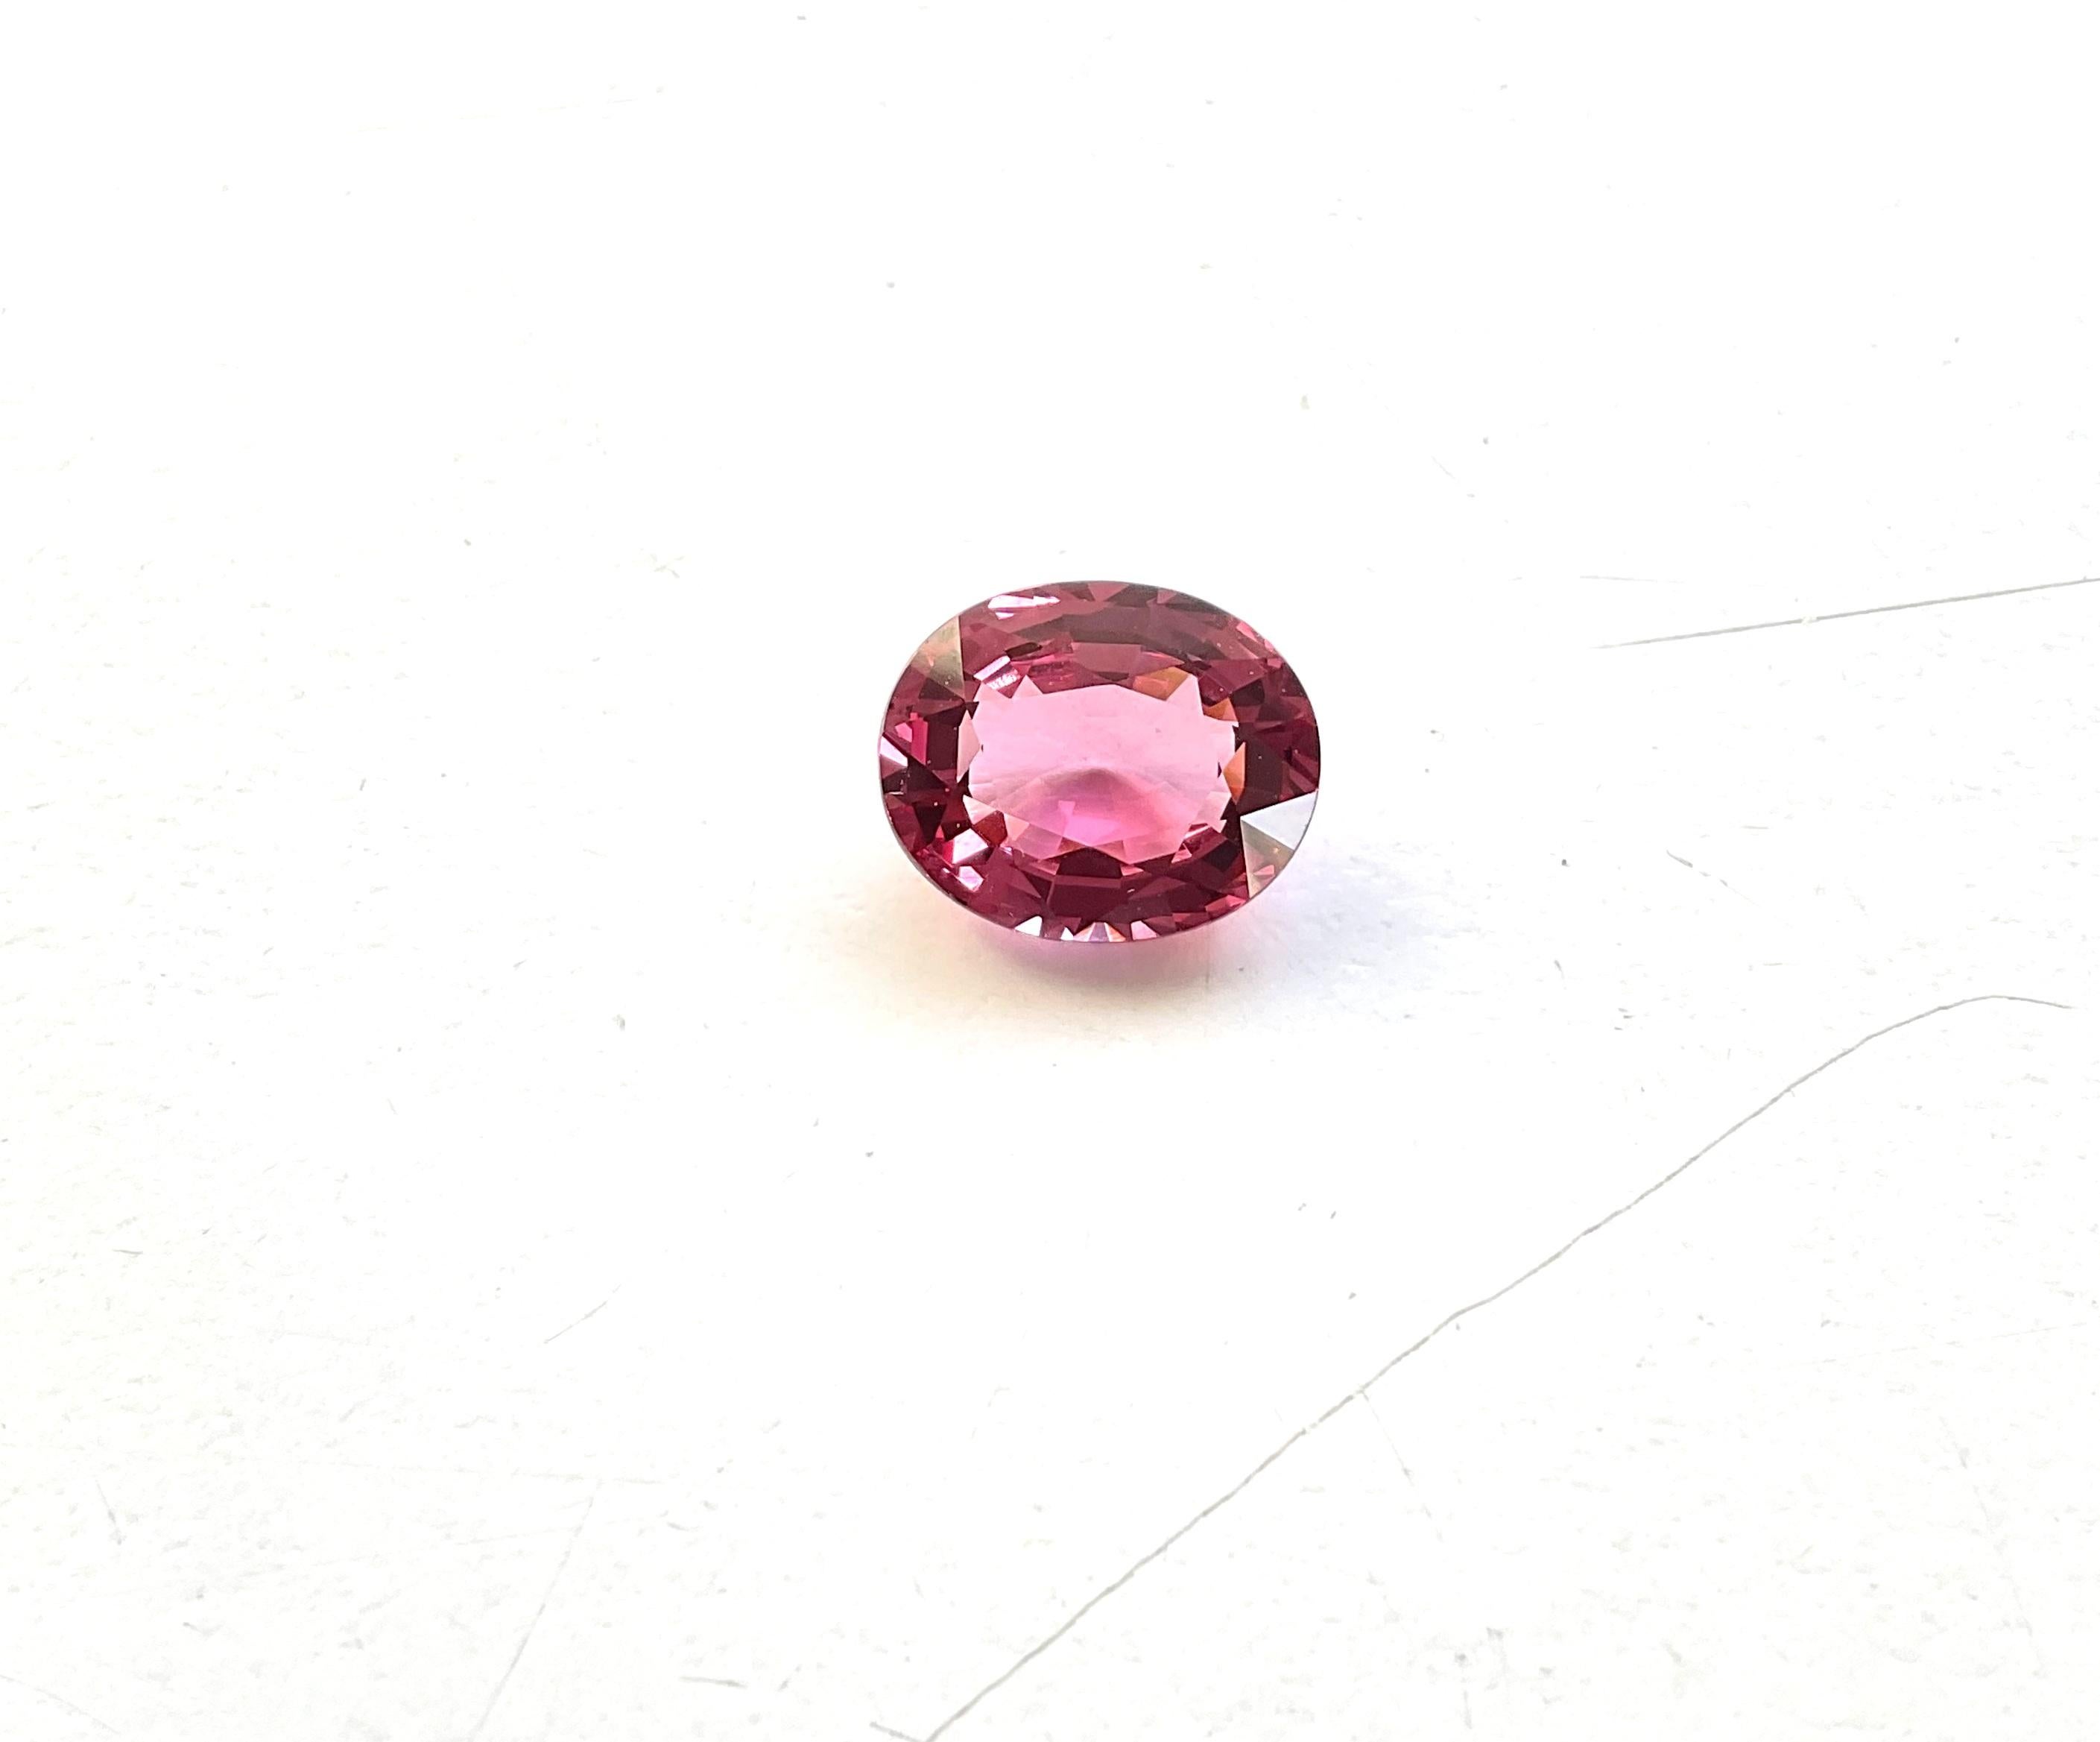 3.78 Carats pinkish burmese spinel cut stone natural gemstone top quality  

Weight: 3.78 Carats
Size: 11x9x5 MM
Pieces: 1
Shape : Oval
